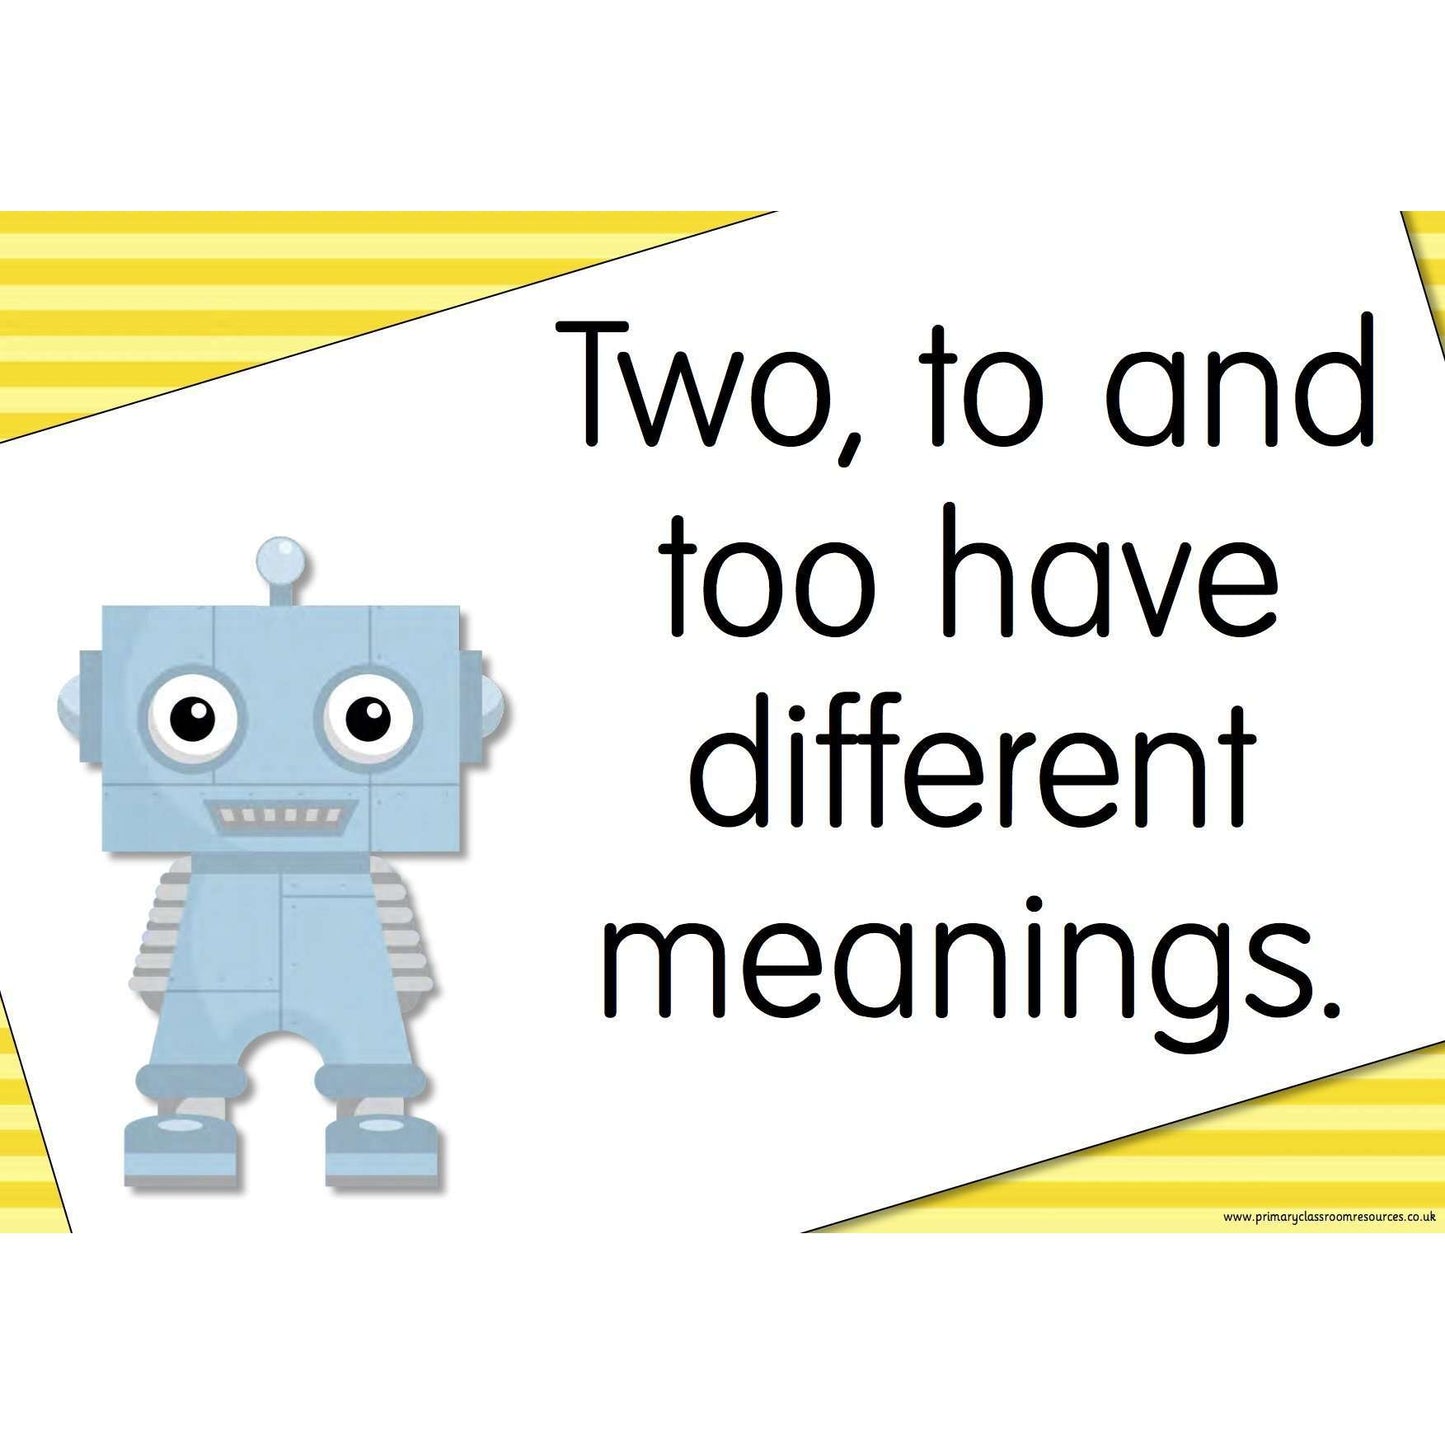 A3 Laminated - The GrammarBots Posters:Primary Classroom Resources